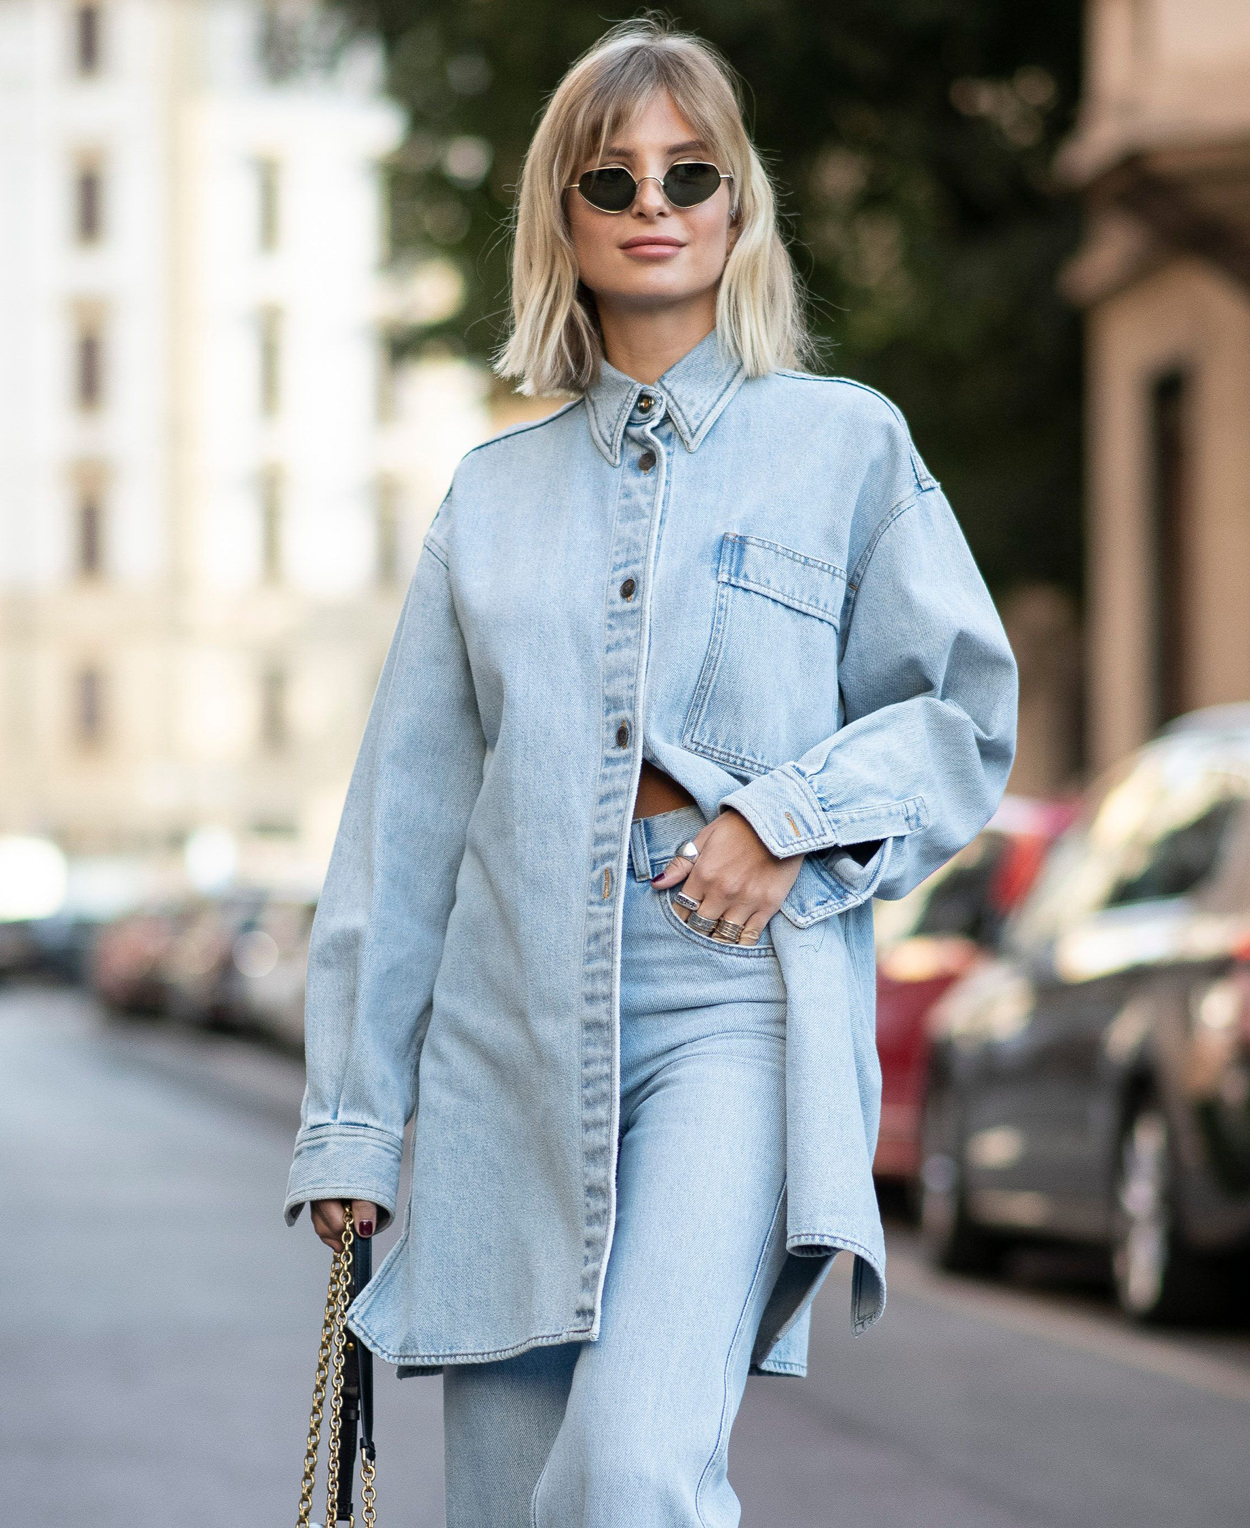 Covetable double denim styles to inspire your spring dressing